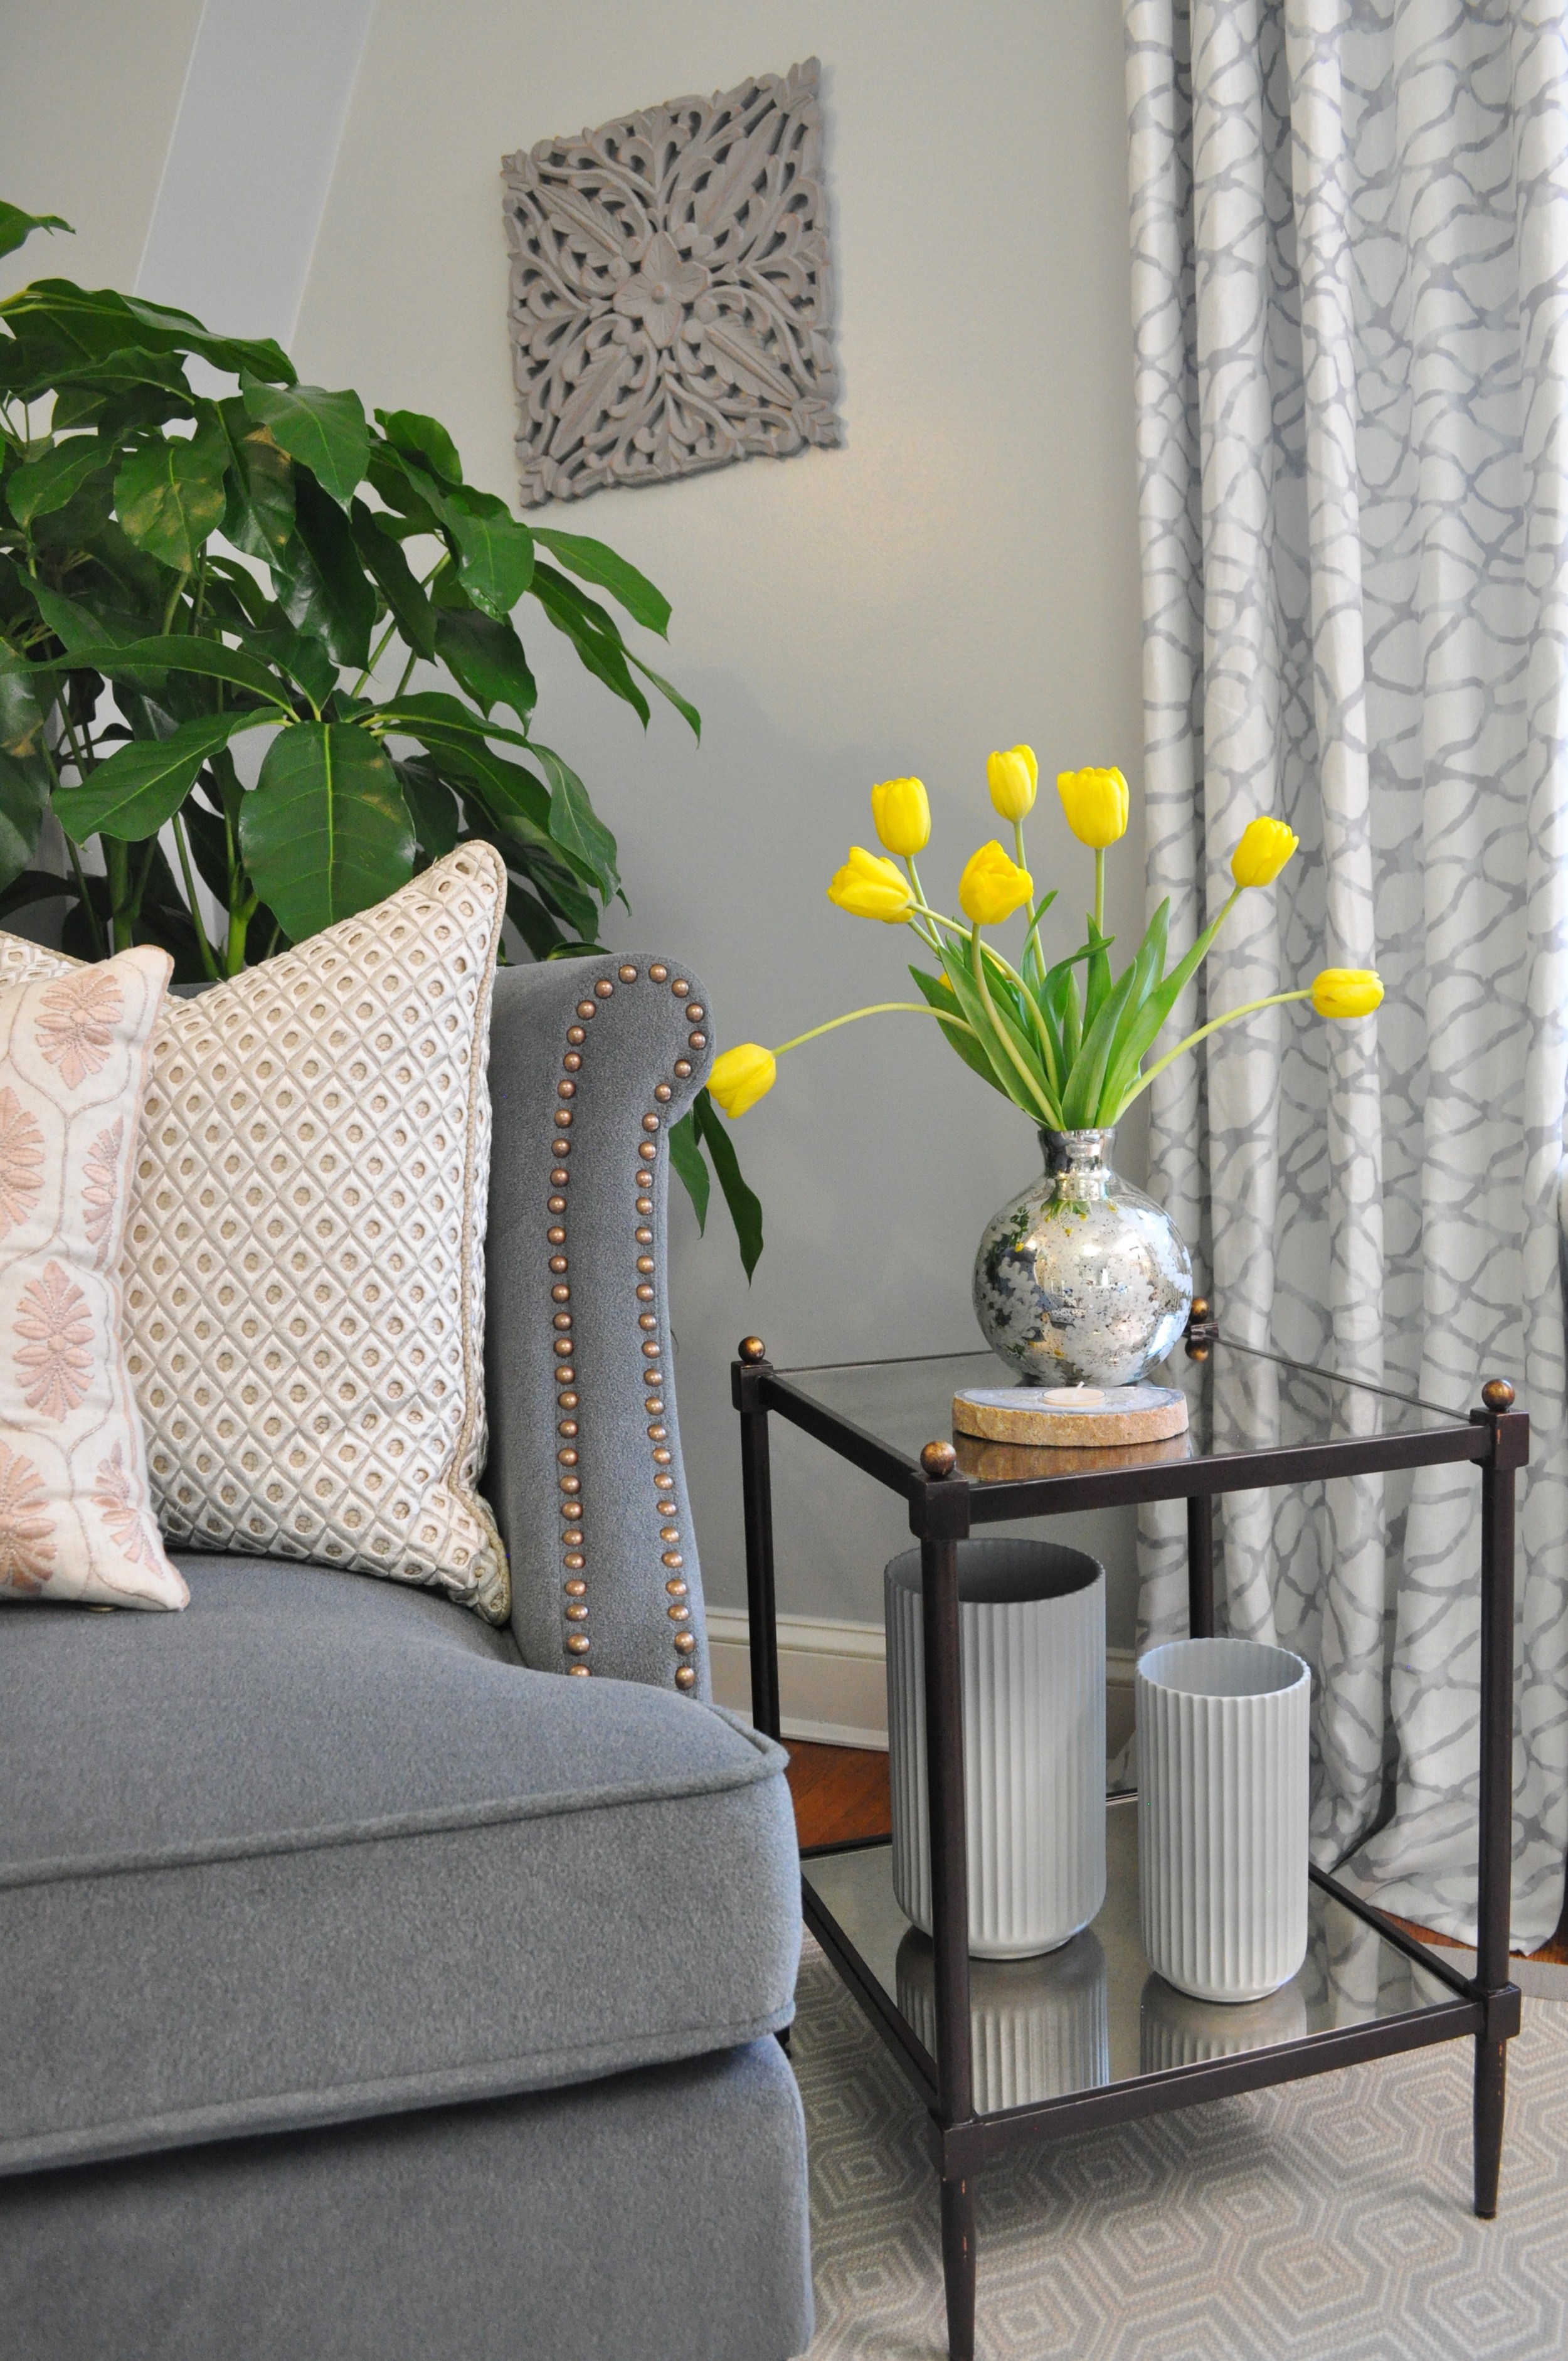 Kim Mitchell Design Lead_HGTV_Buying and Selling with The Property Brothers_Season 5_Episode 8_Bedroom_Side Table_Chair_Tulips_Kontrast Vases_8_31_2016.jpg